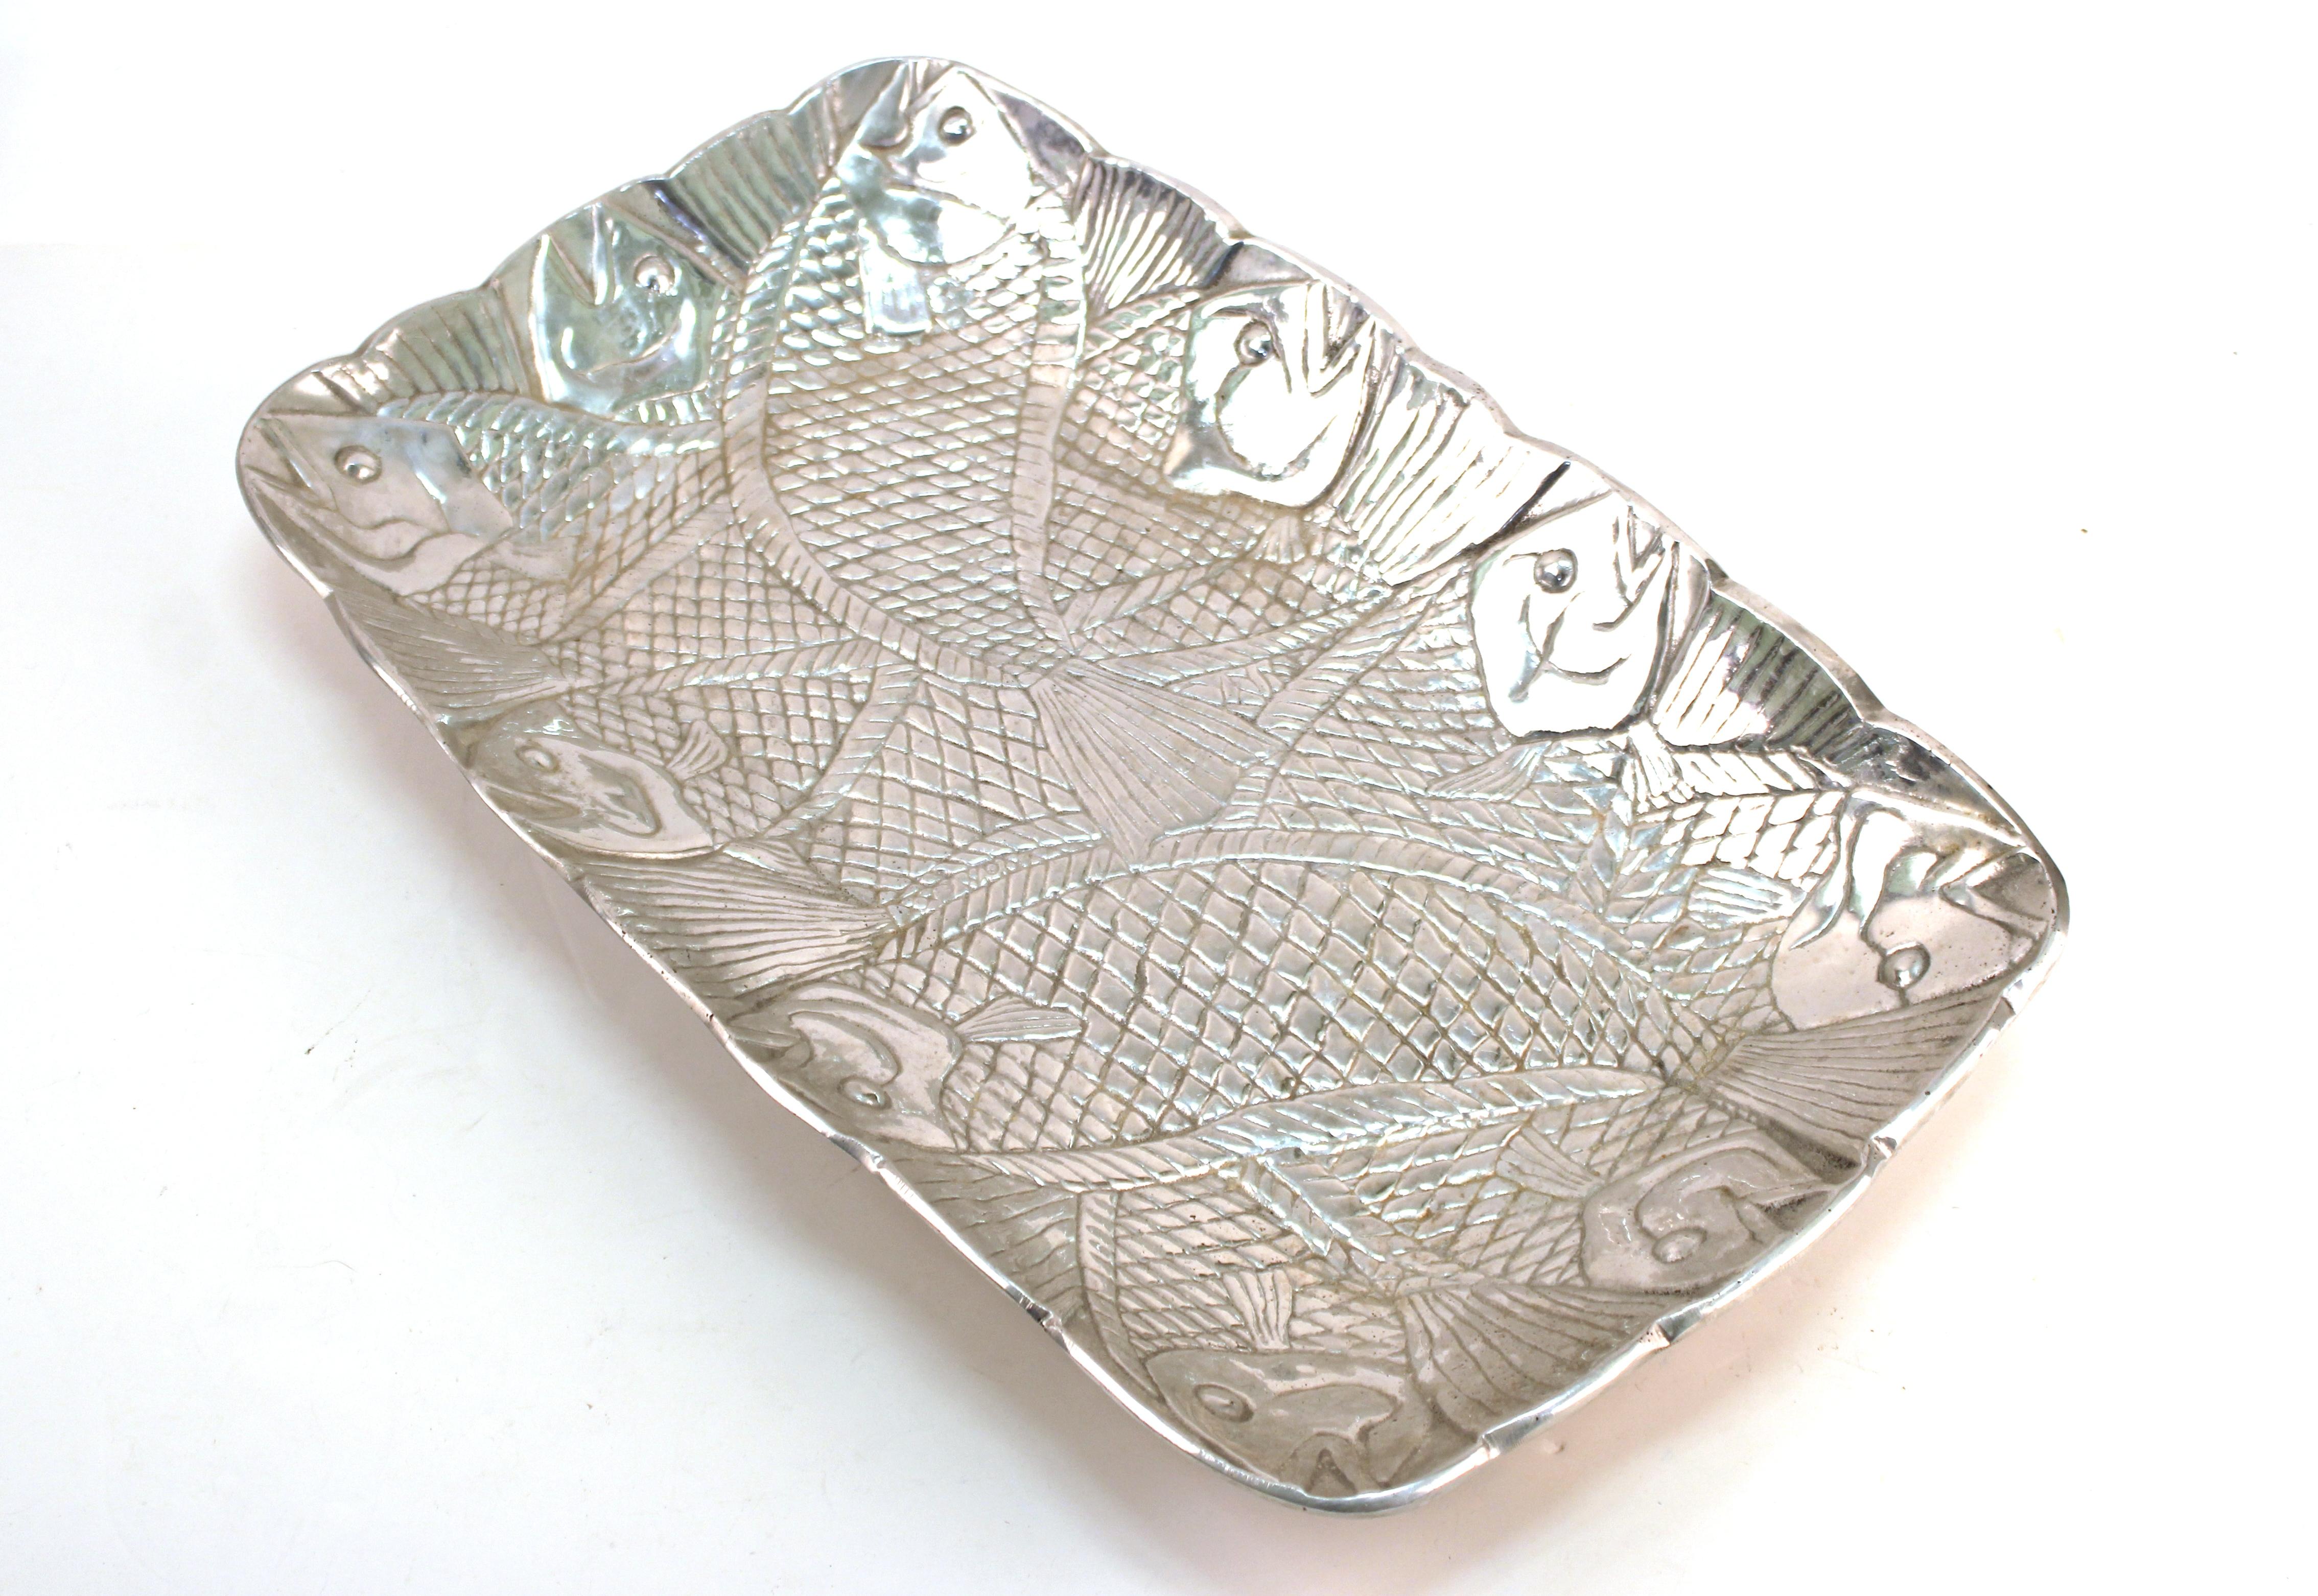 Modern aluminum serving tray or decorative dish designed in the style of Arthur Court. The piece has an all-over fish theme and is unmarked. In great vintage condition with age-appropriate wear and use.